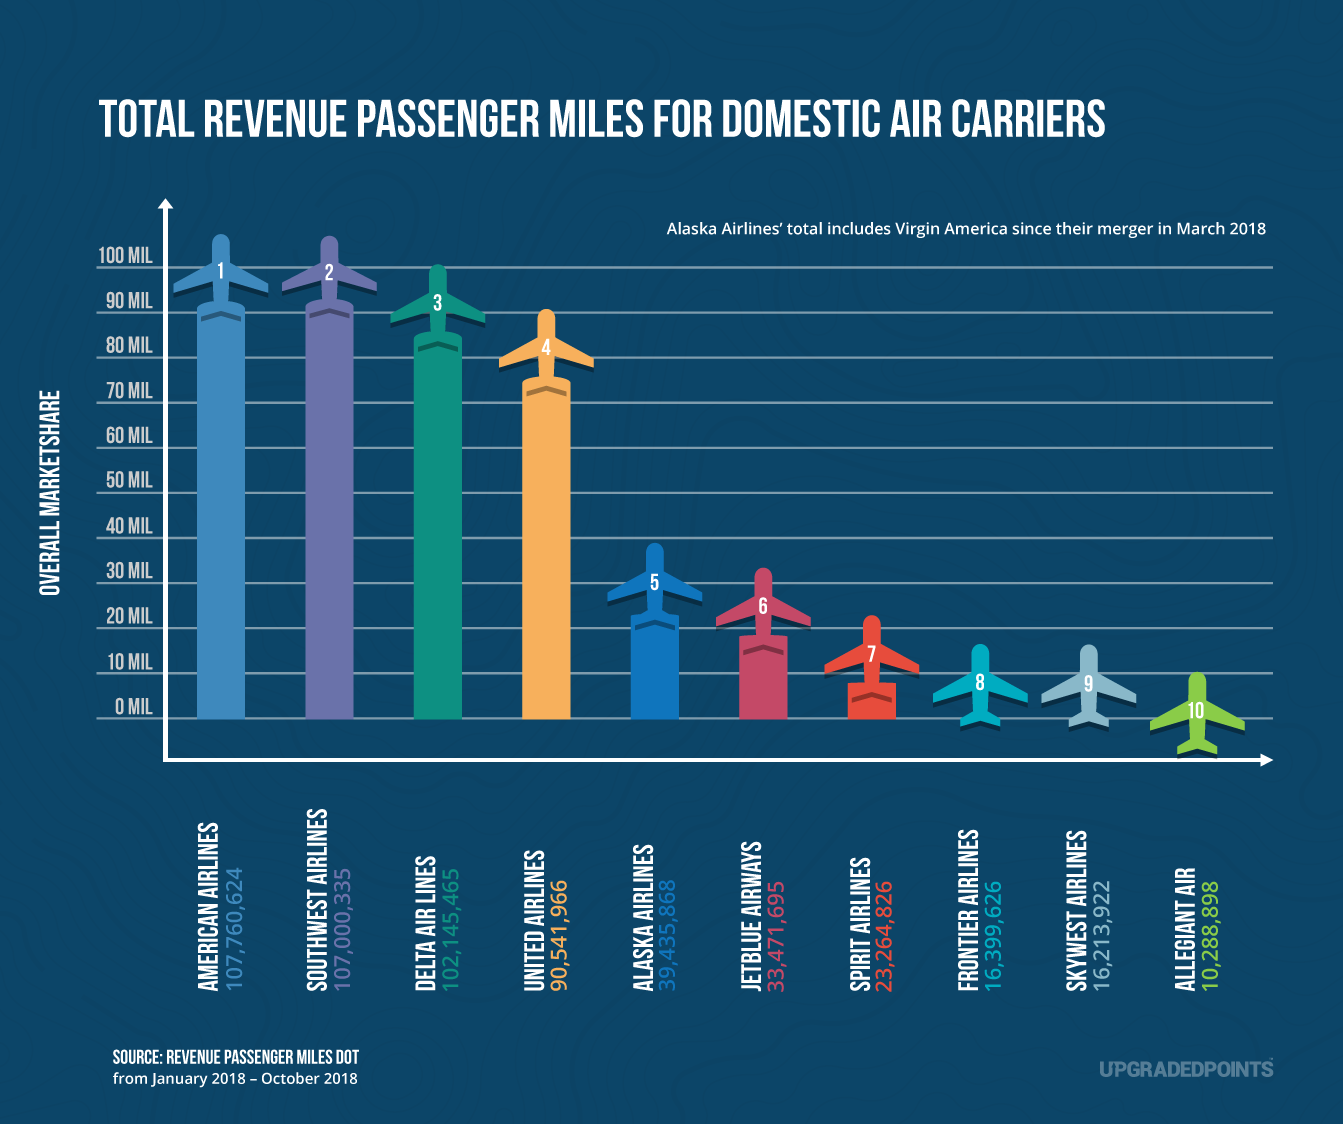 Which U.S. Airlines Dominate Market Share in North America? [Data Study]